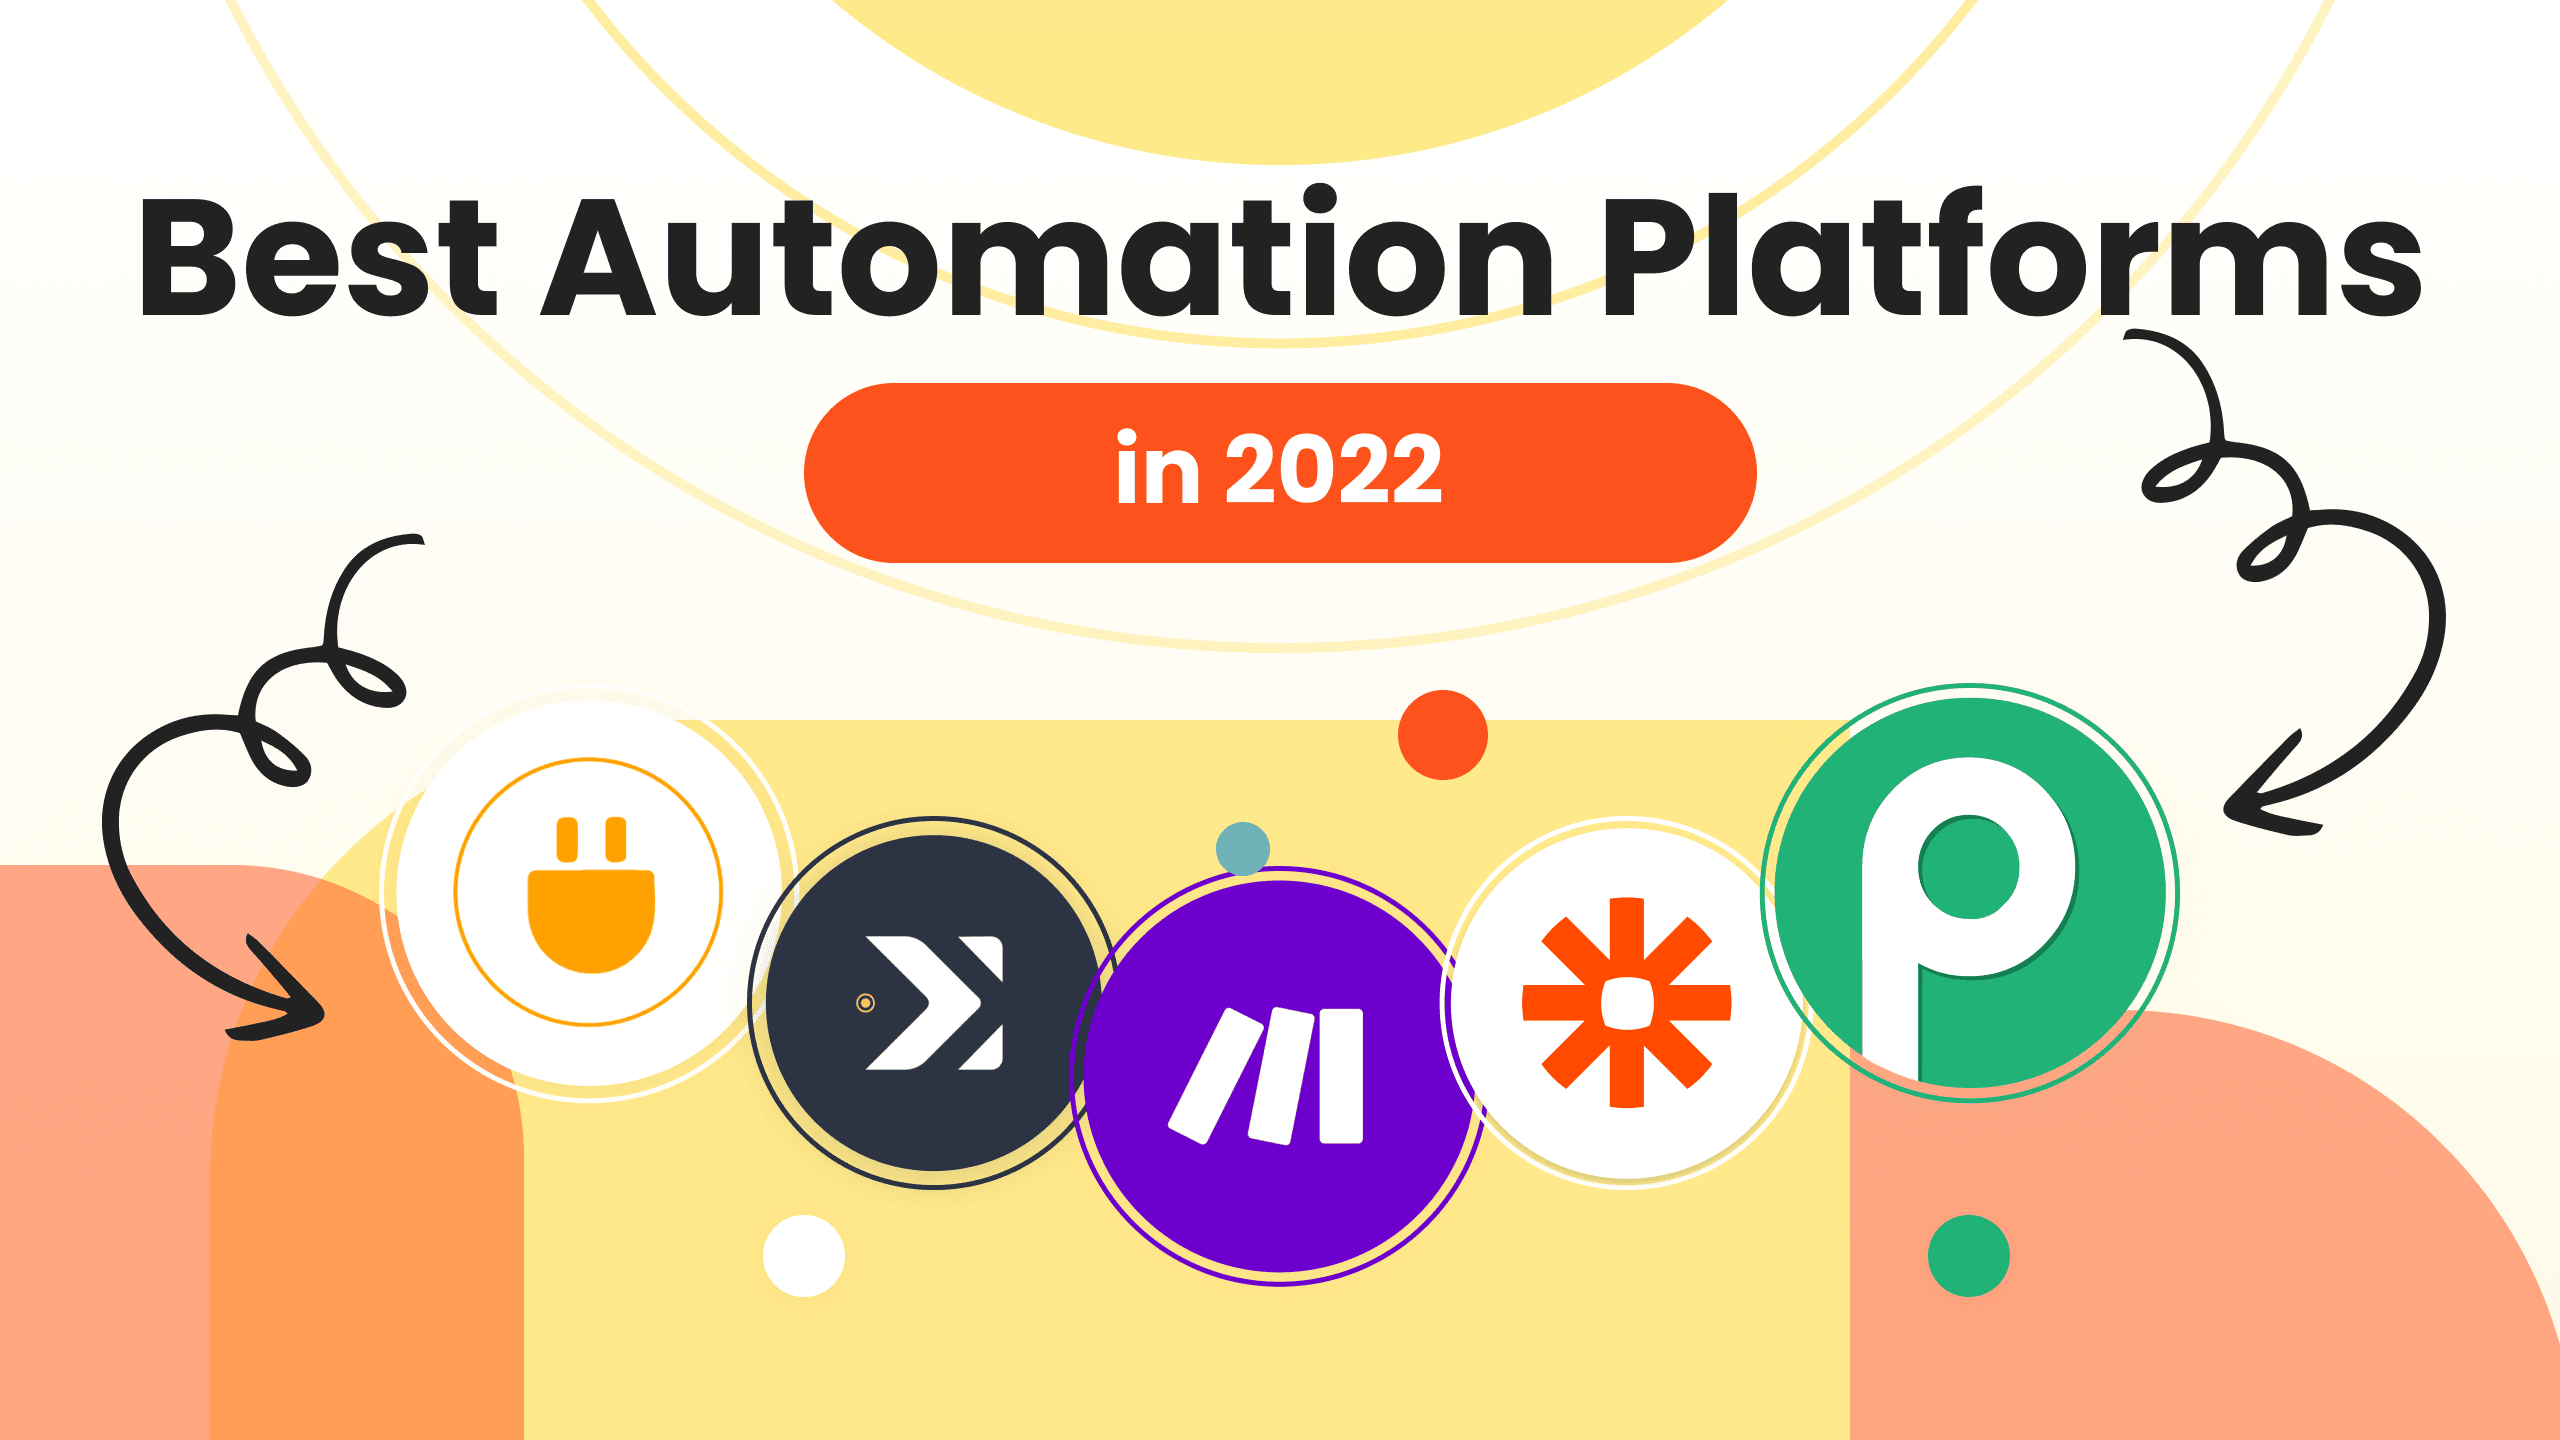 Which Automation Platform to choose in 2022?